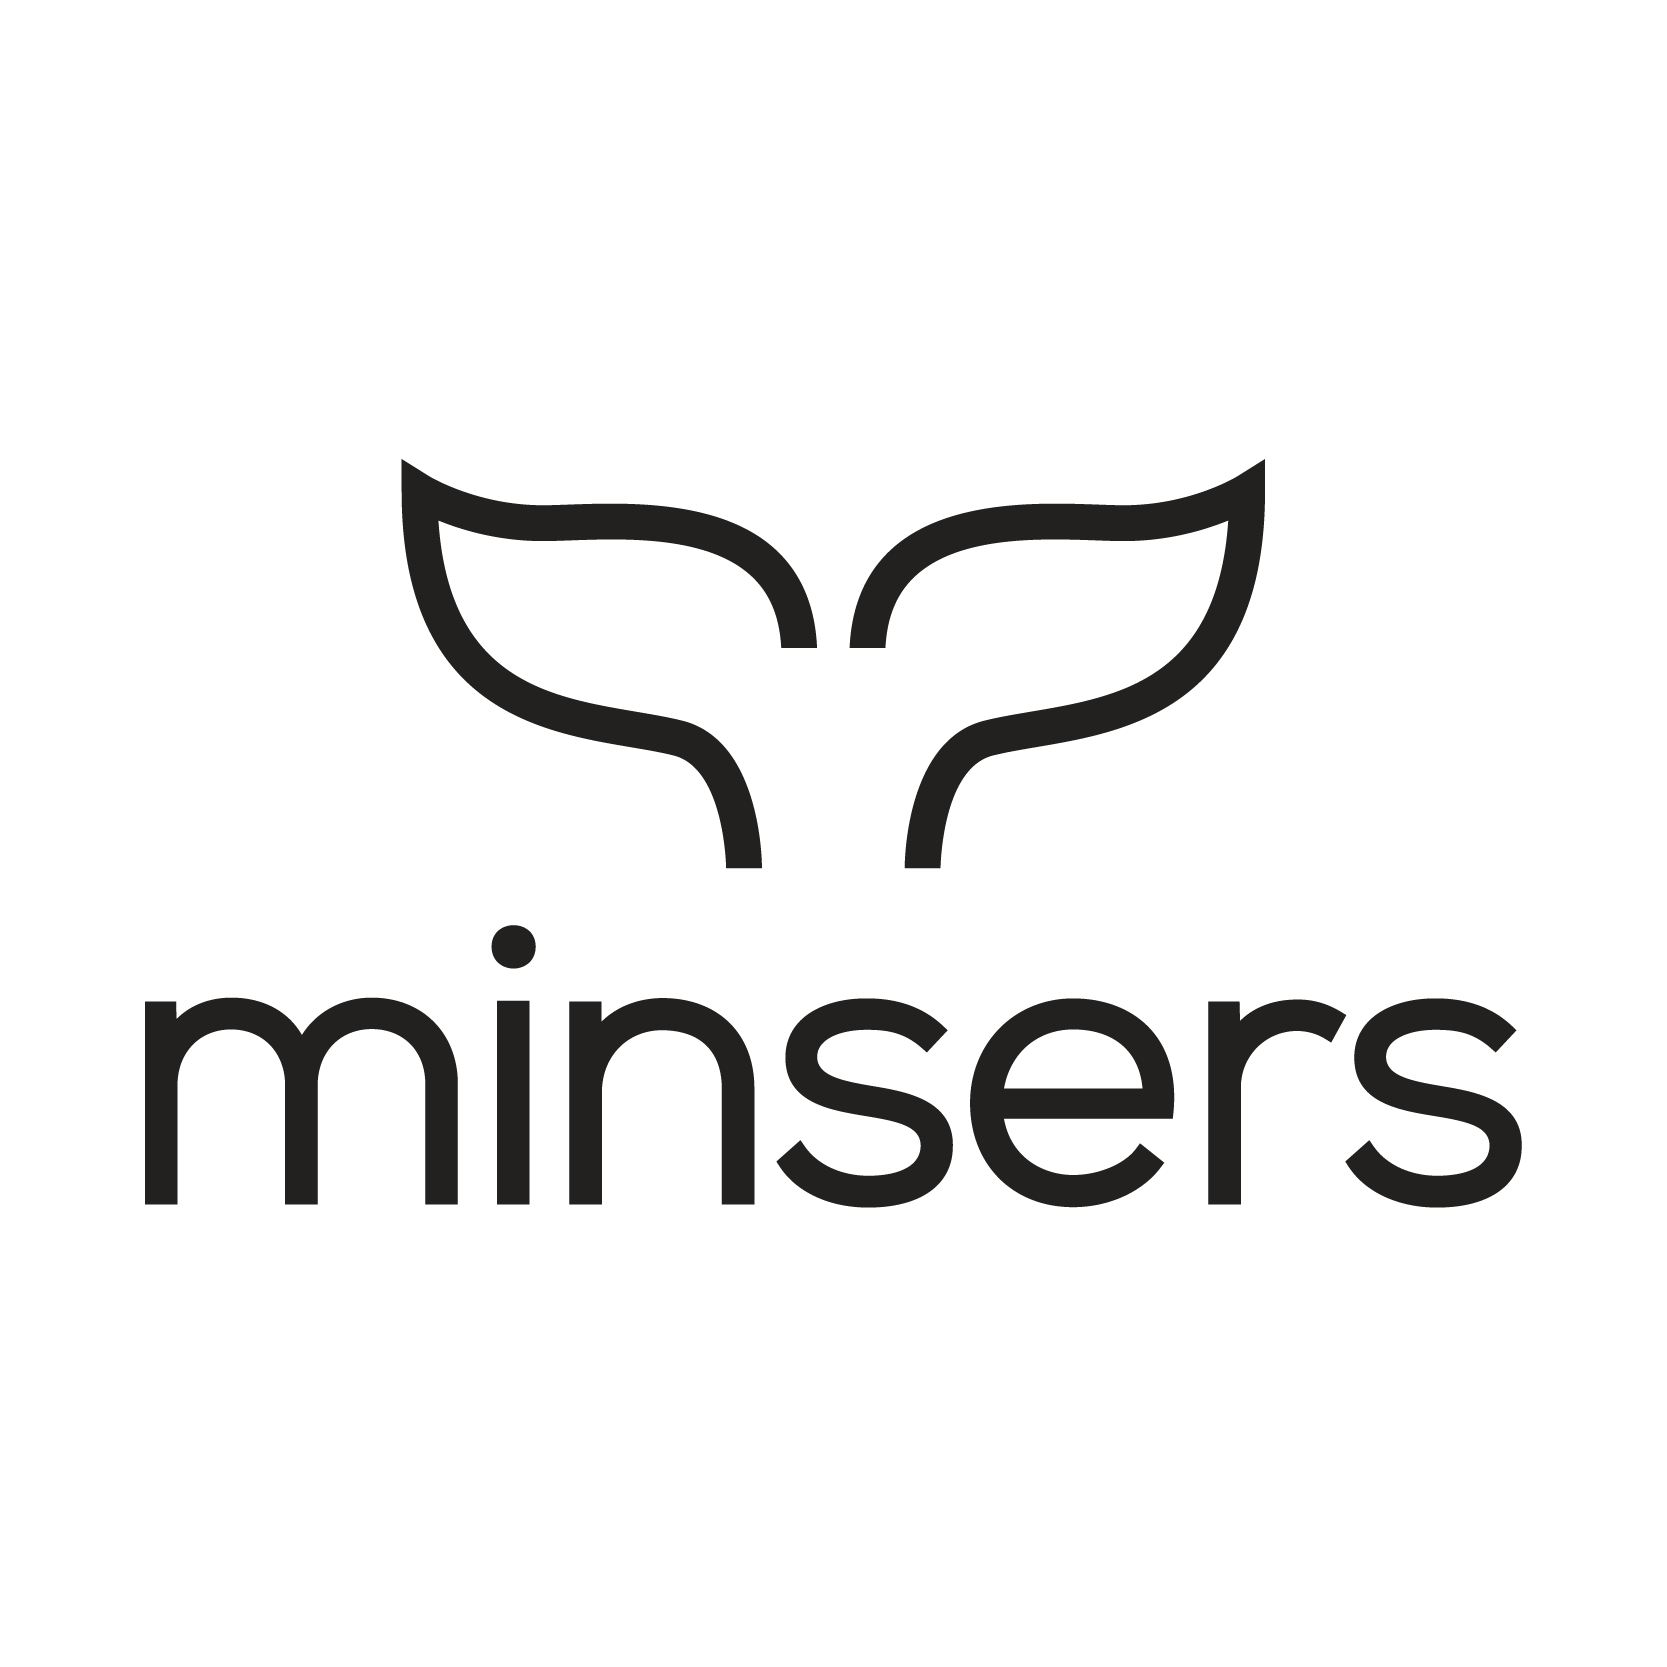 Minsers logo without background